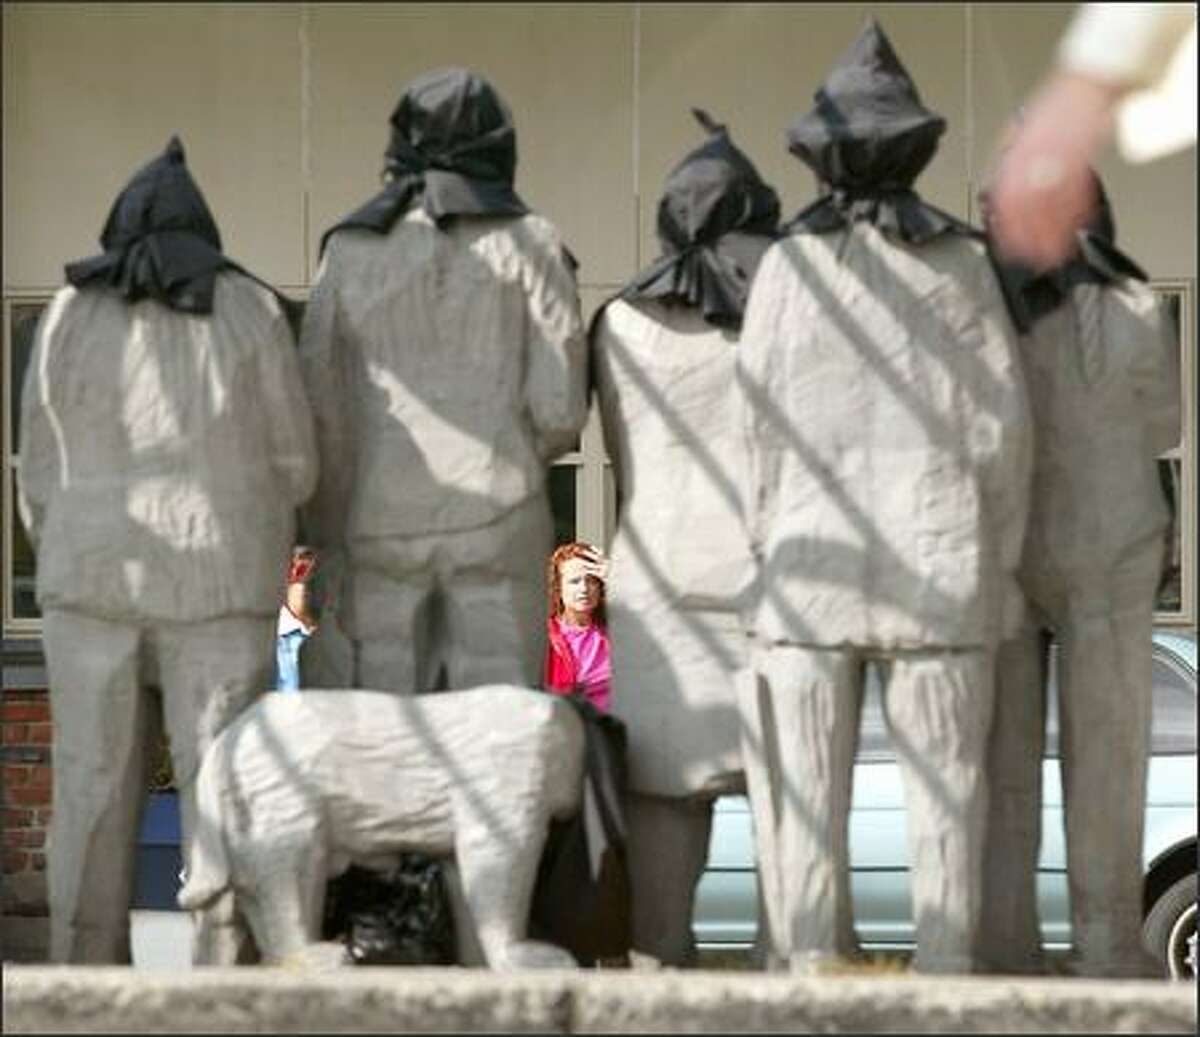 The figures in Fremont's "Waiting for the Interurban" sculpture were hooded yesterday, a reference to the recent prison-abuse photos from the war in Iraq.